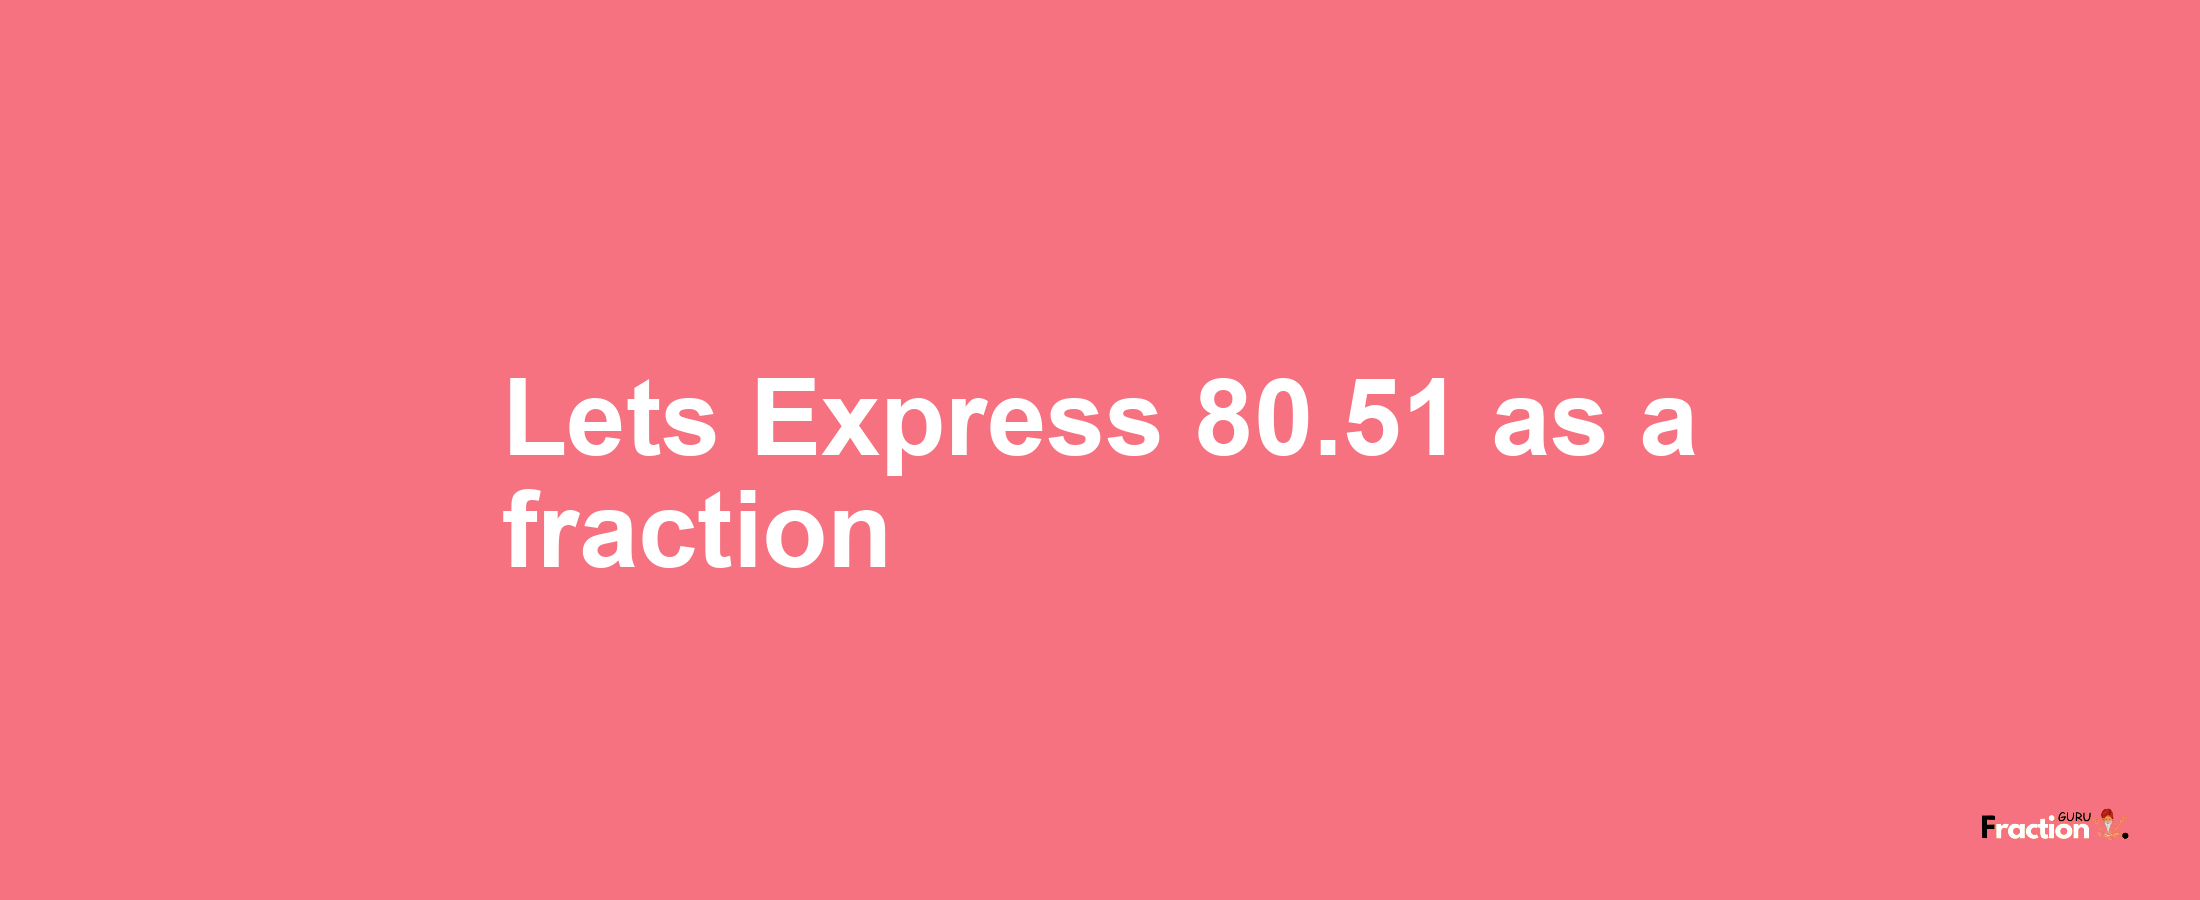 Lets Express 80.51 as afraction